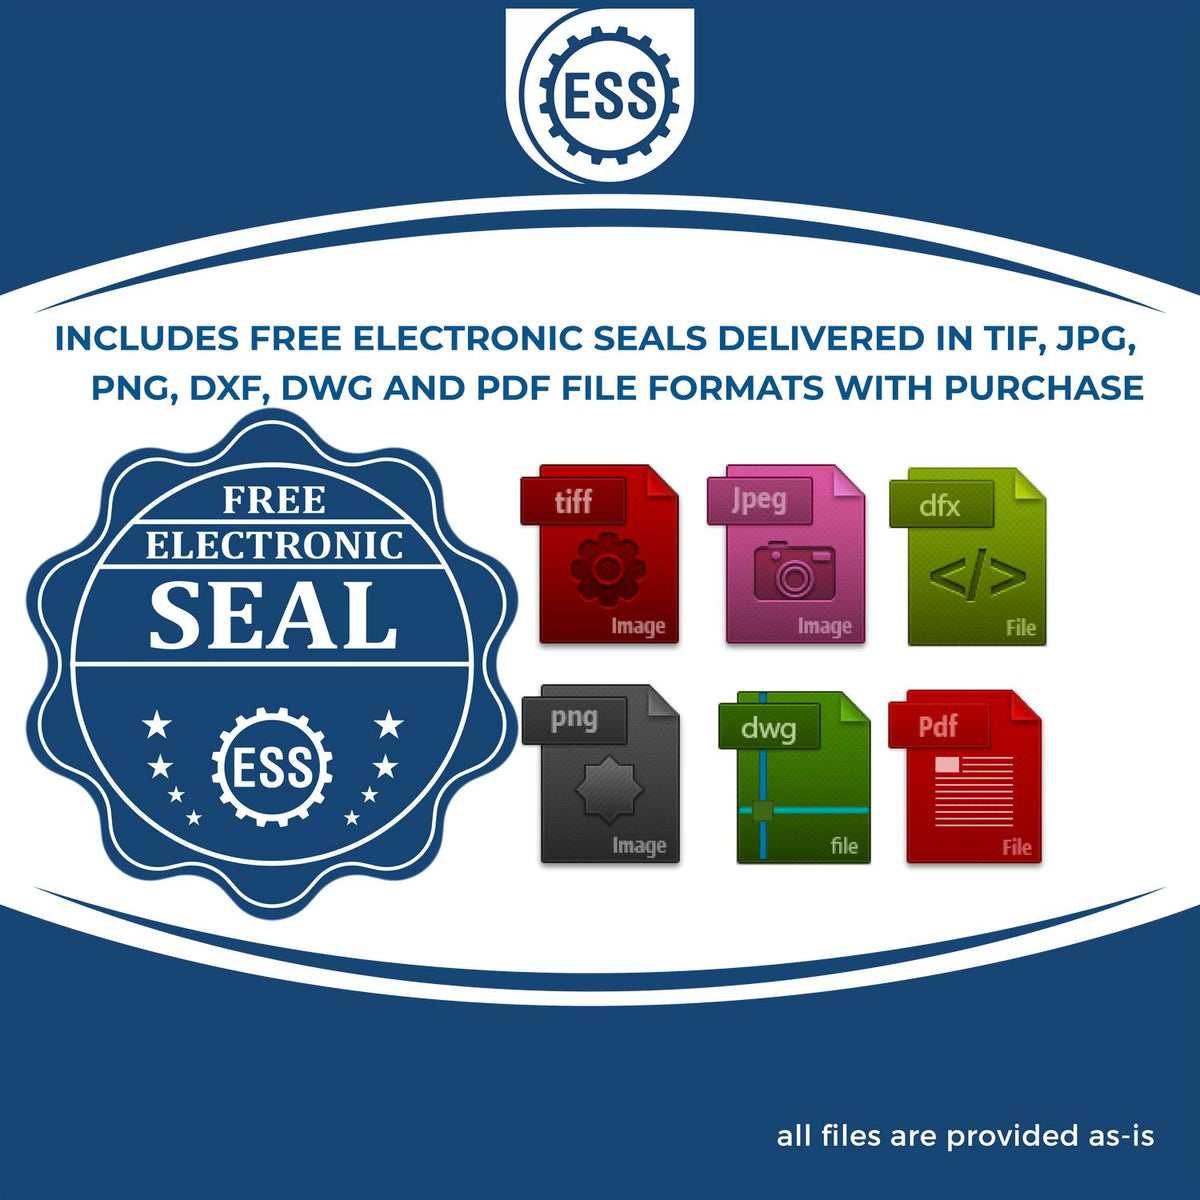 An infographic for the free electronic seal for the Heavy Duty Cast Iron Hawaii Geologist Seal Embosser illustrating the different file type icons such as DXF, DWG, TIF, JPG and PNG.